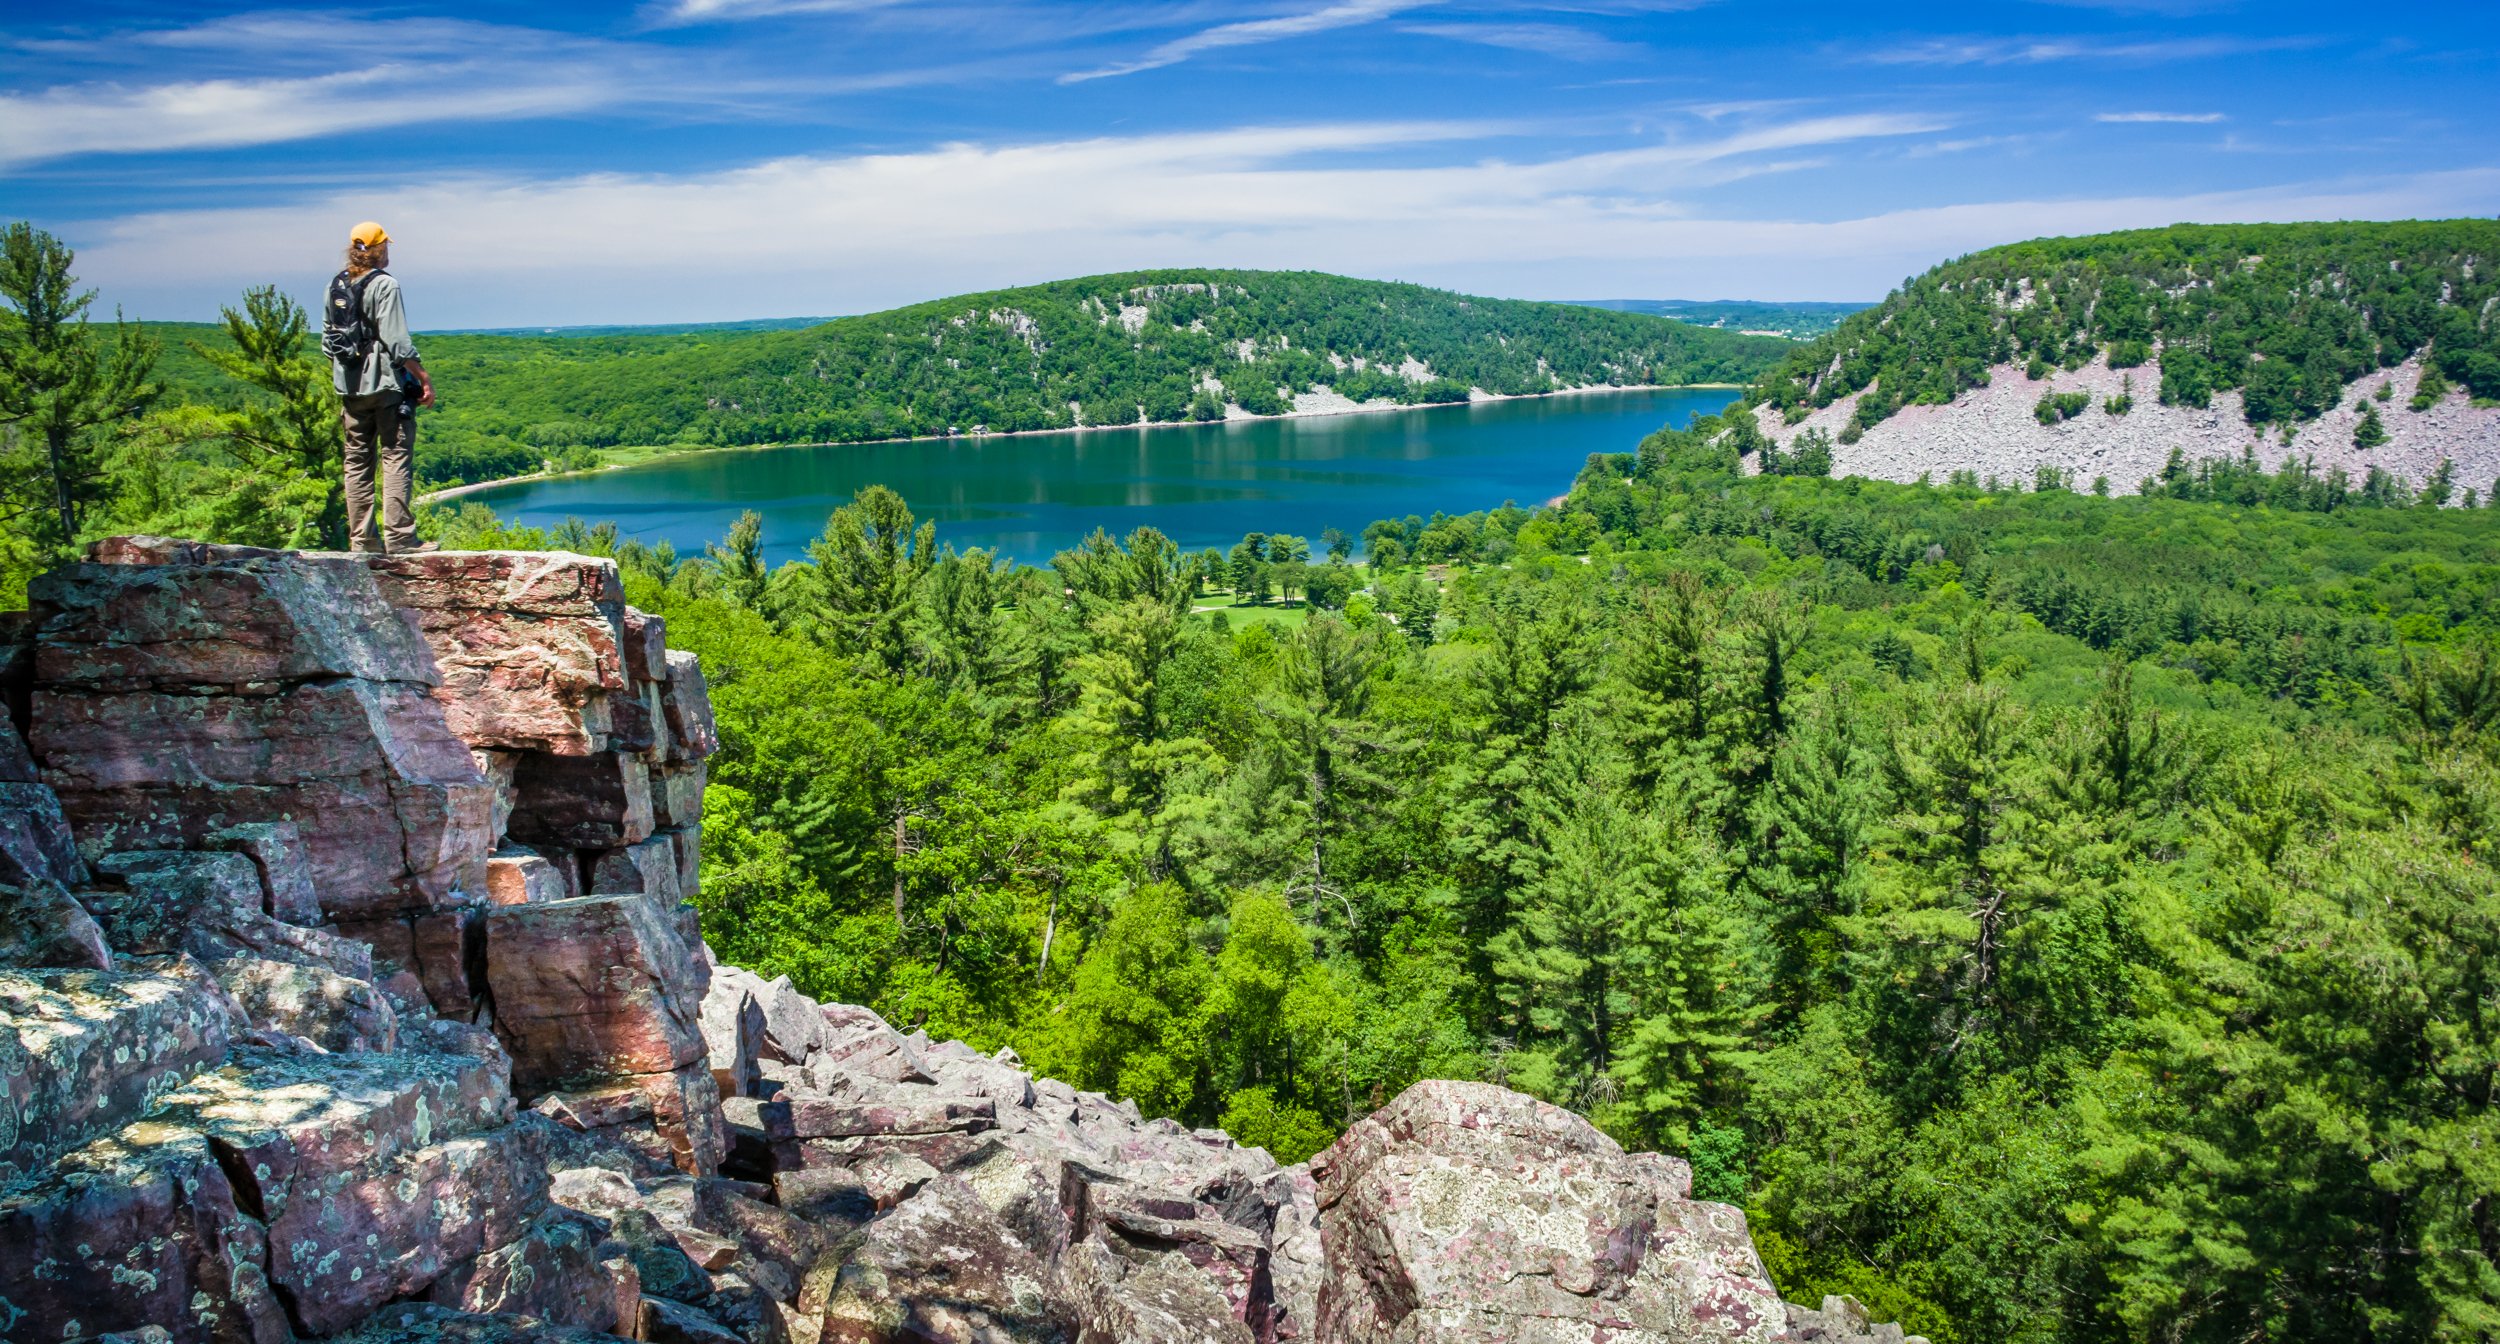  Looking Northwest from the South ridge, Devil’s Lake State Park   Photo by:Yenti Eilertson 